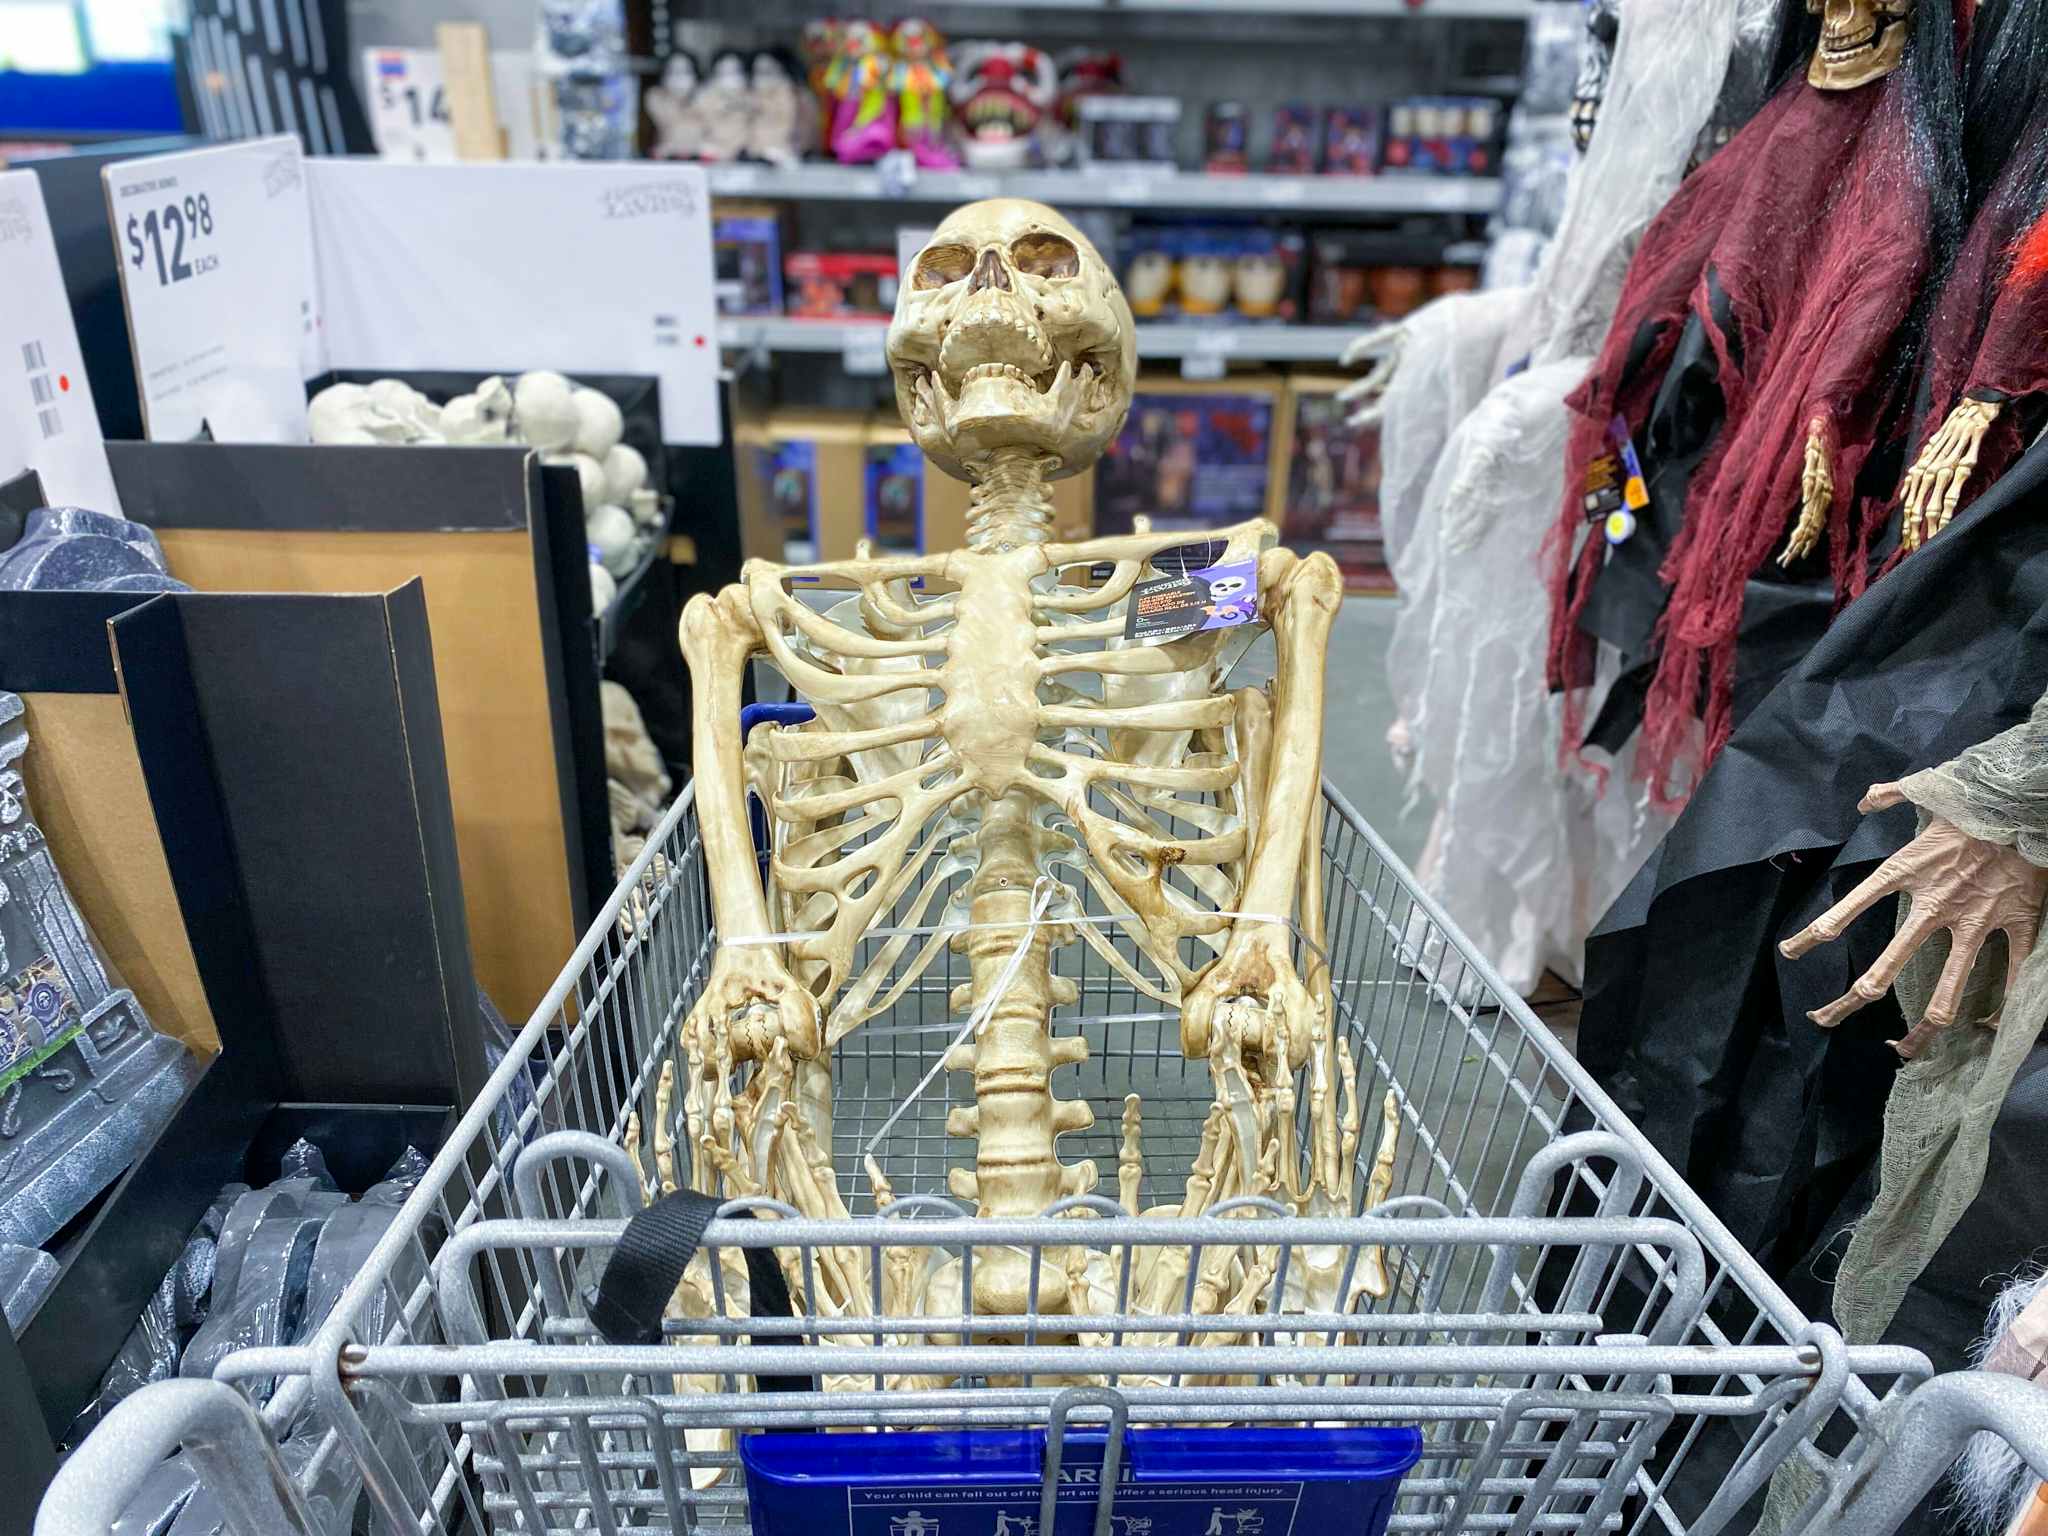 haunted living 7-foot poseable skeleton in lowes cart